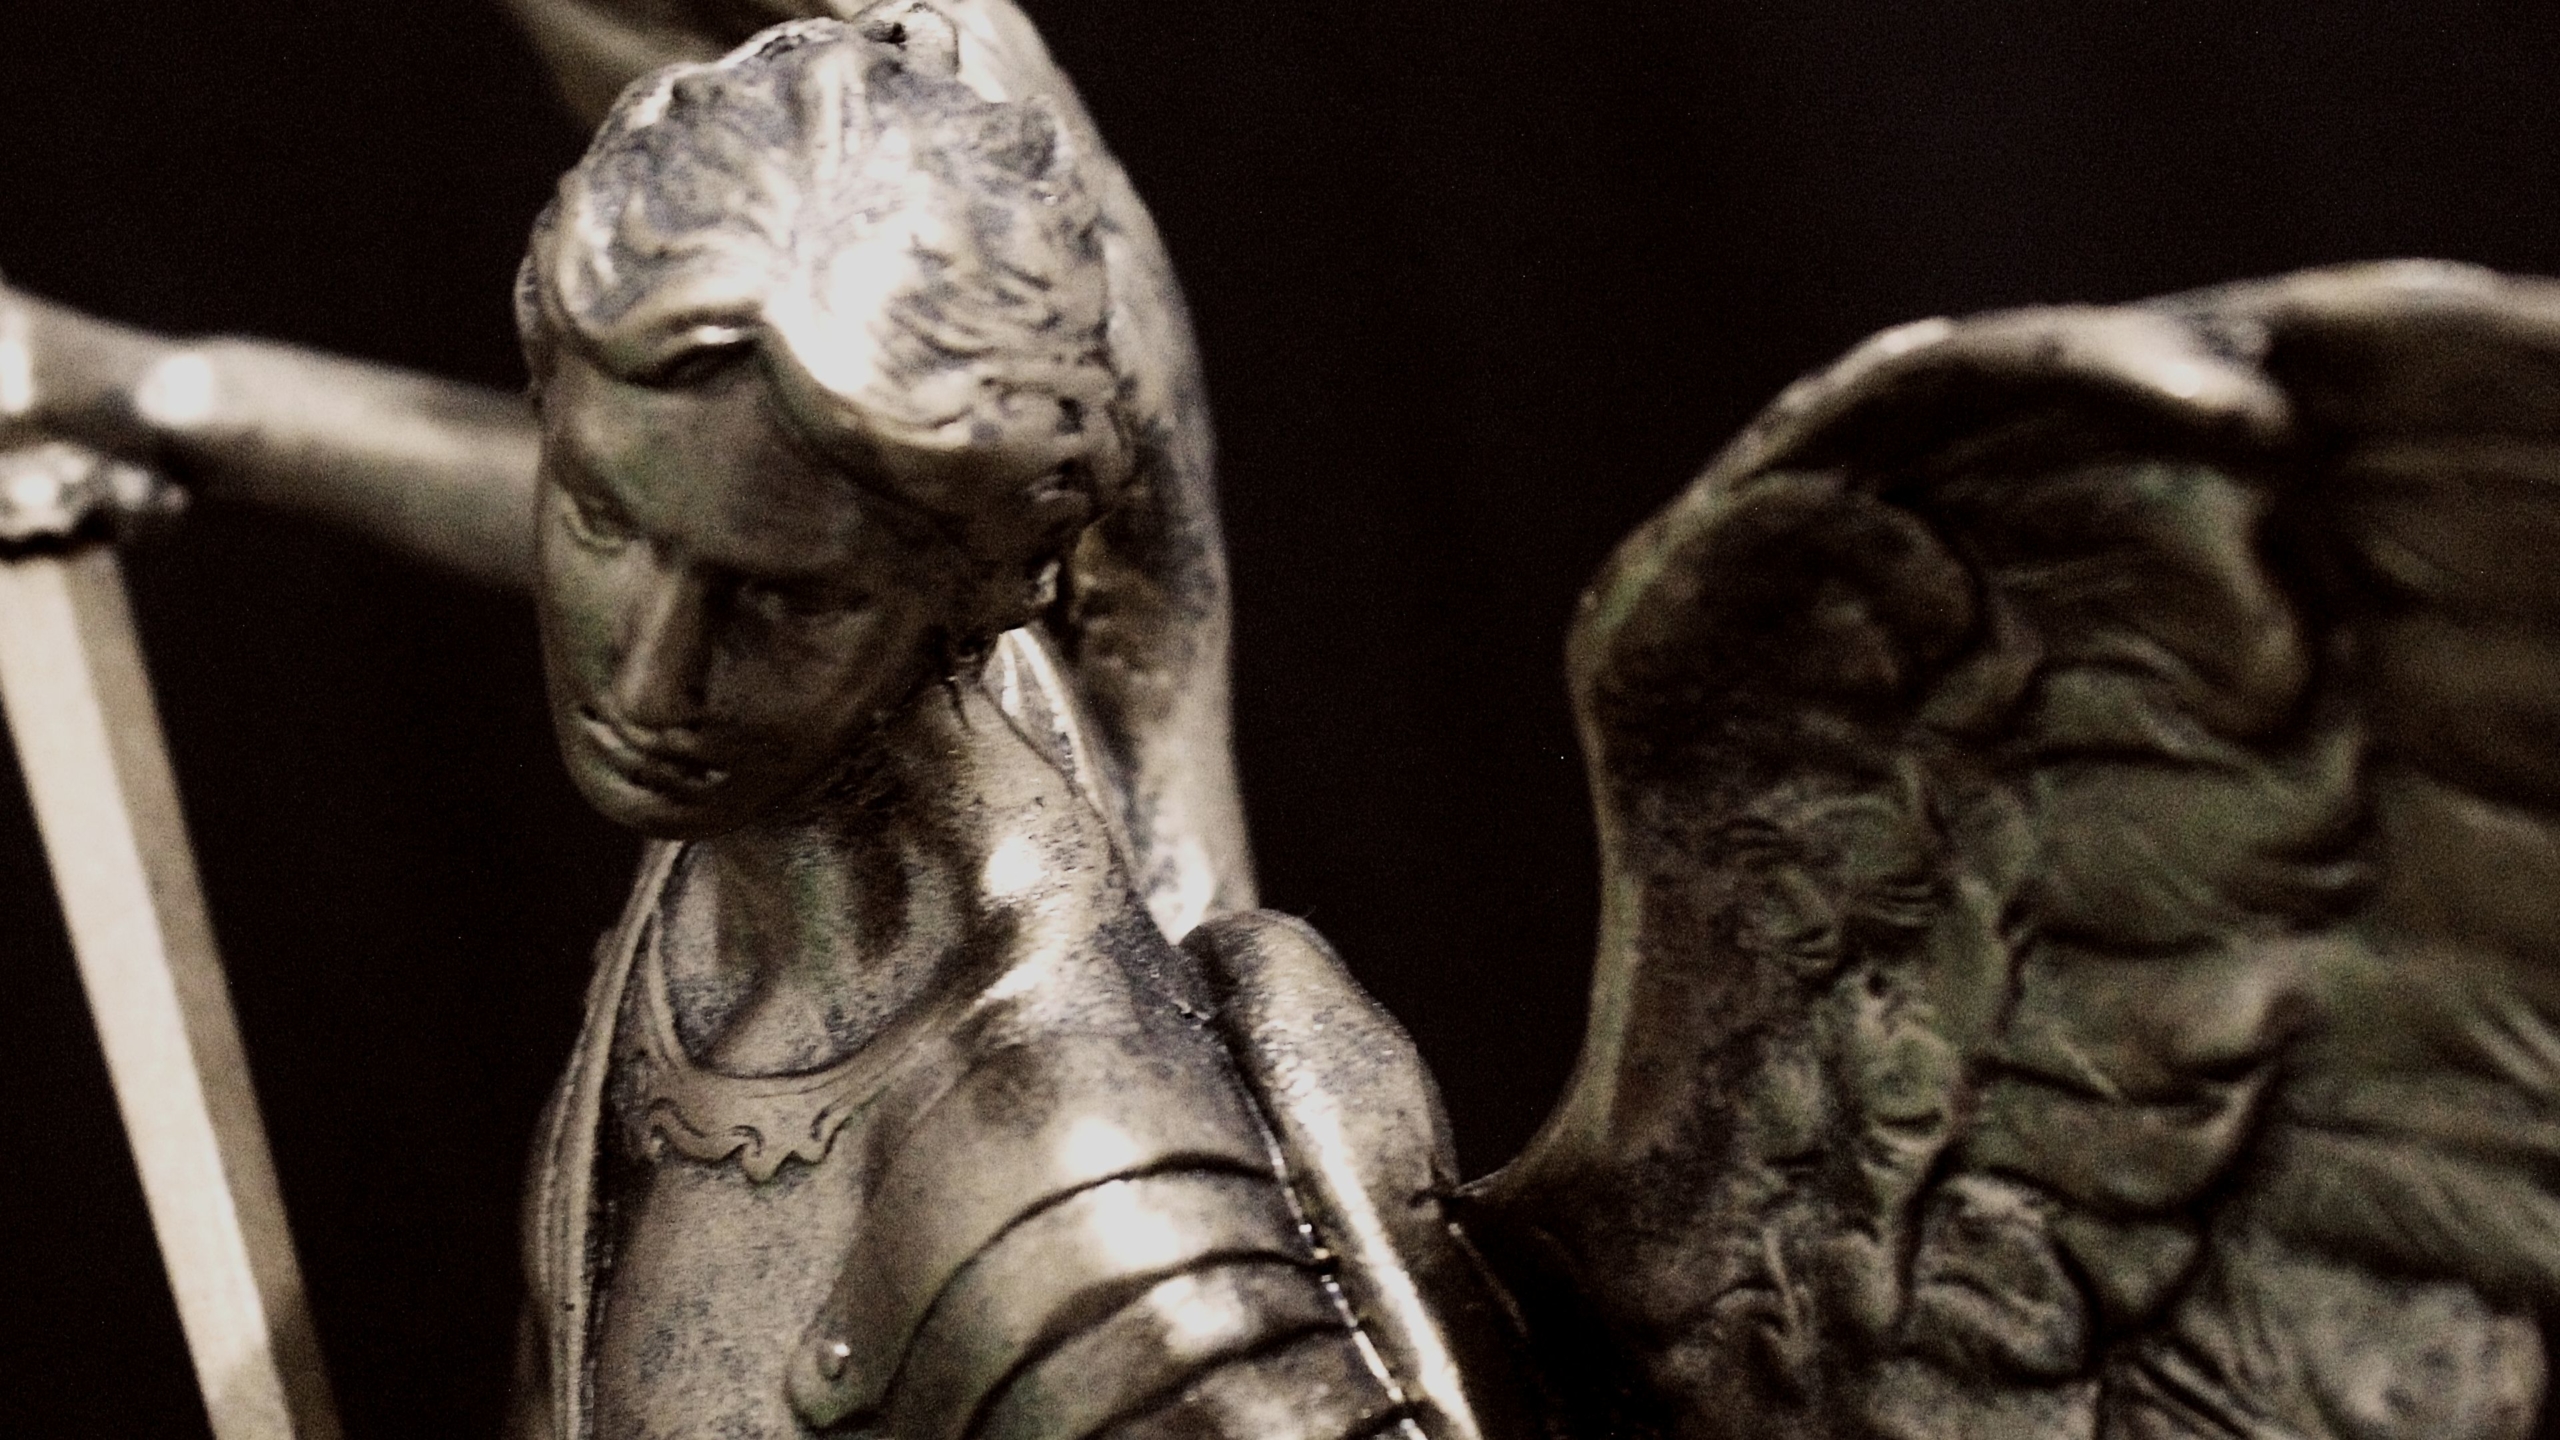 Statue of Saint Michael the archangel with sword